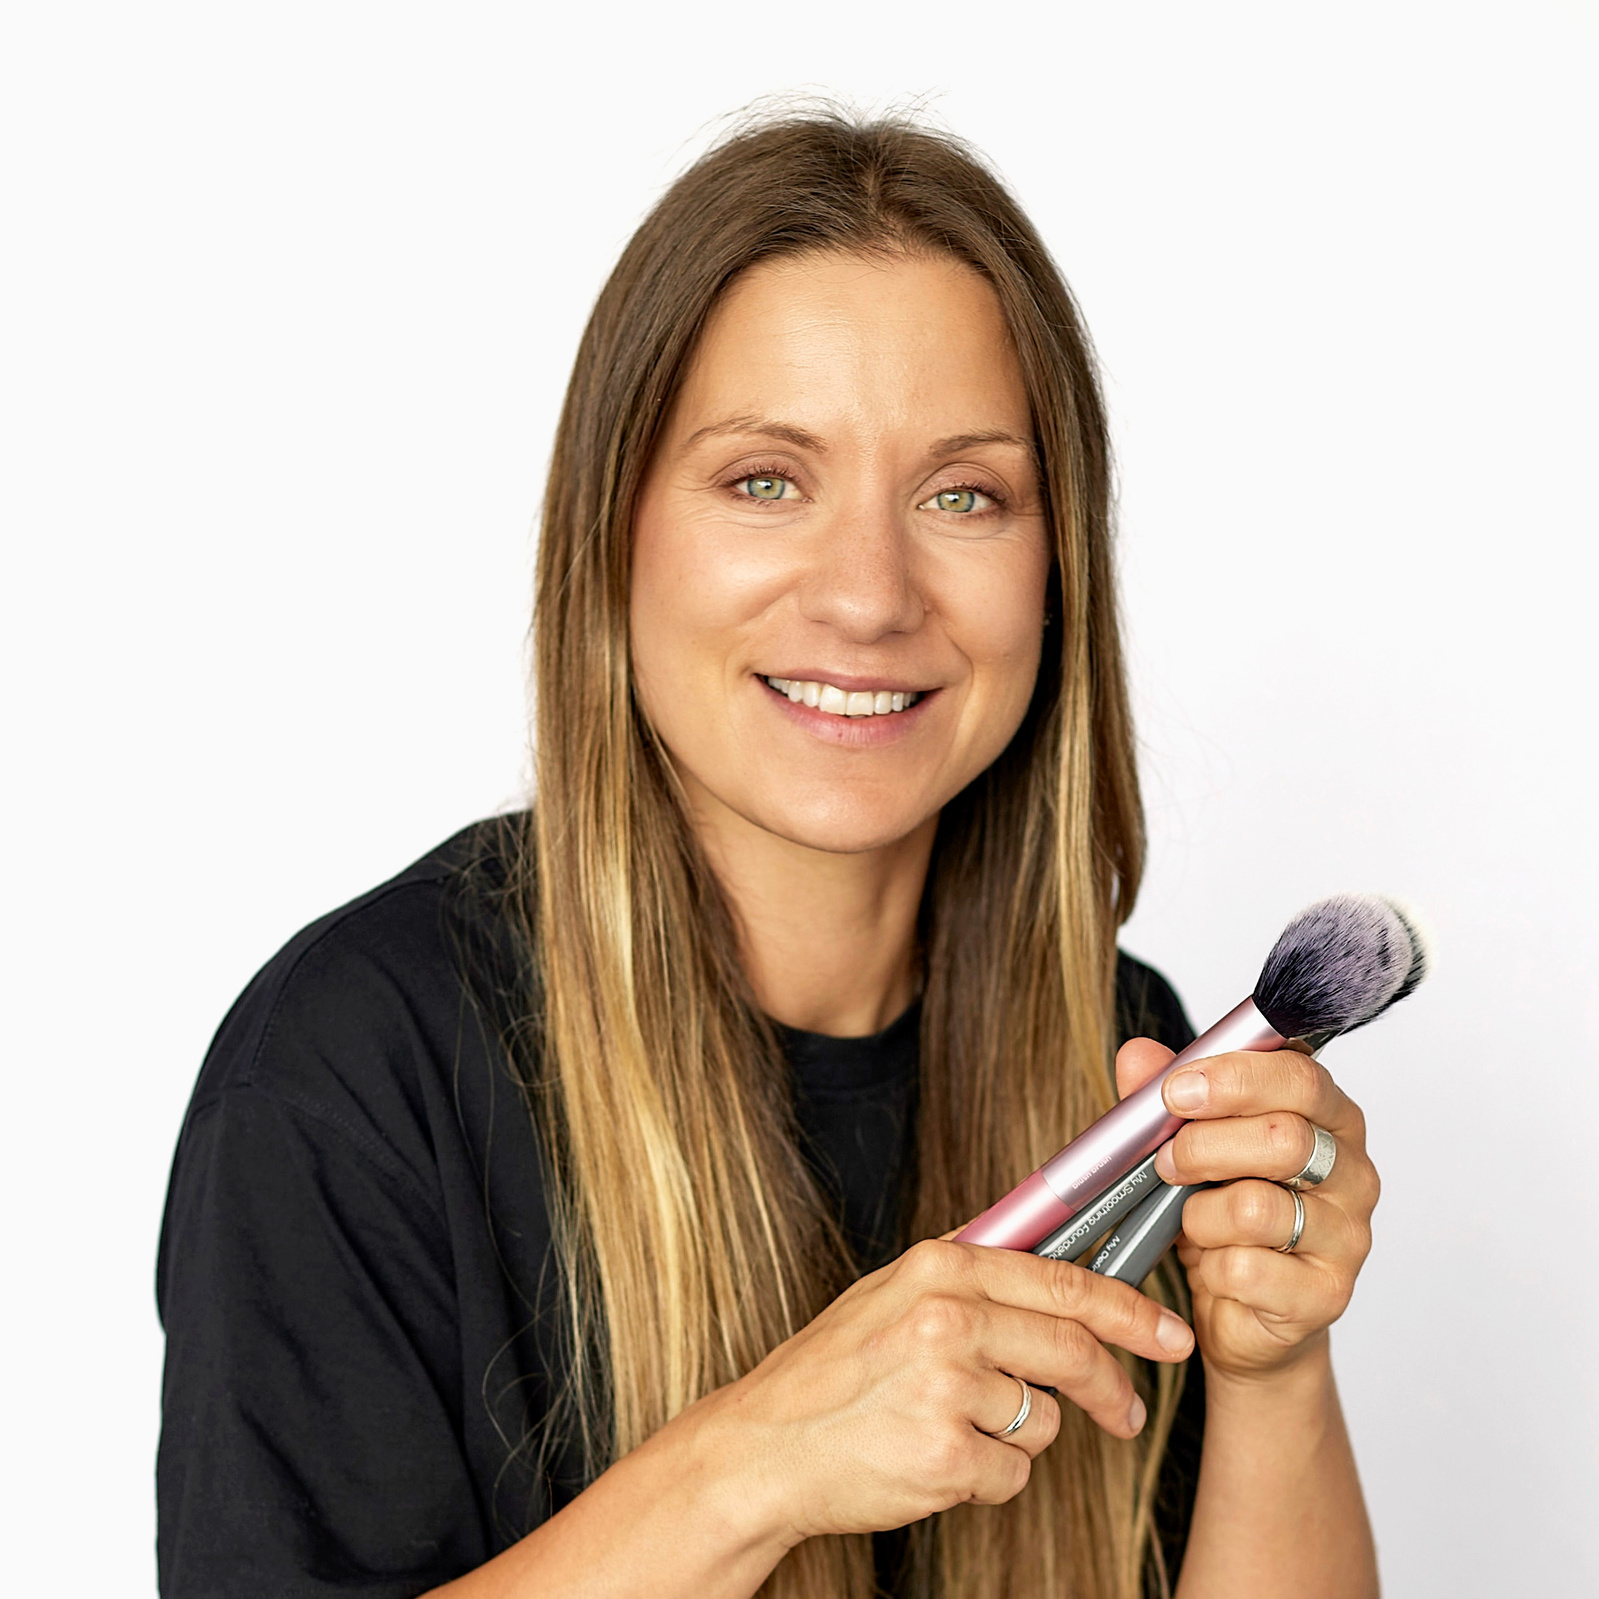 personal branding photo of makeup artist in studio against a white background 